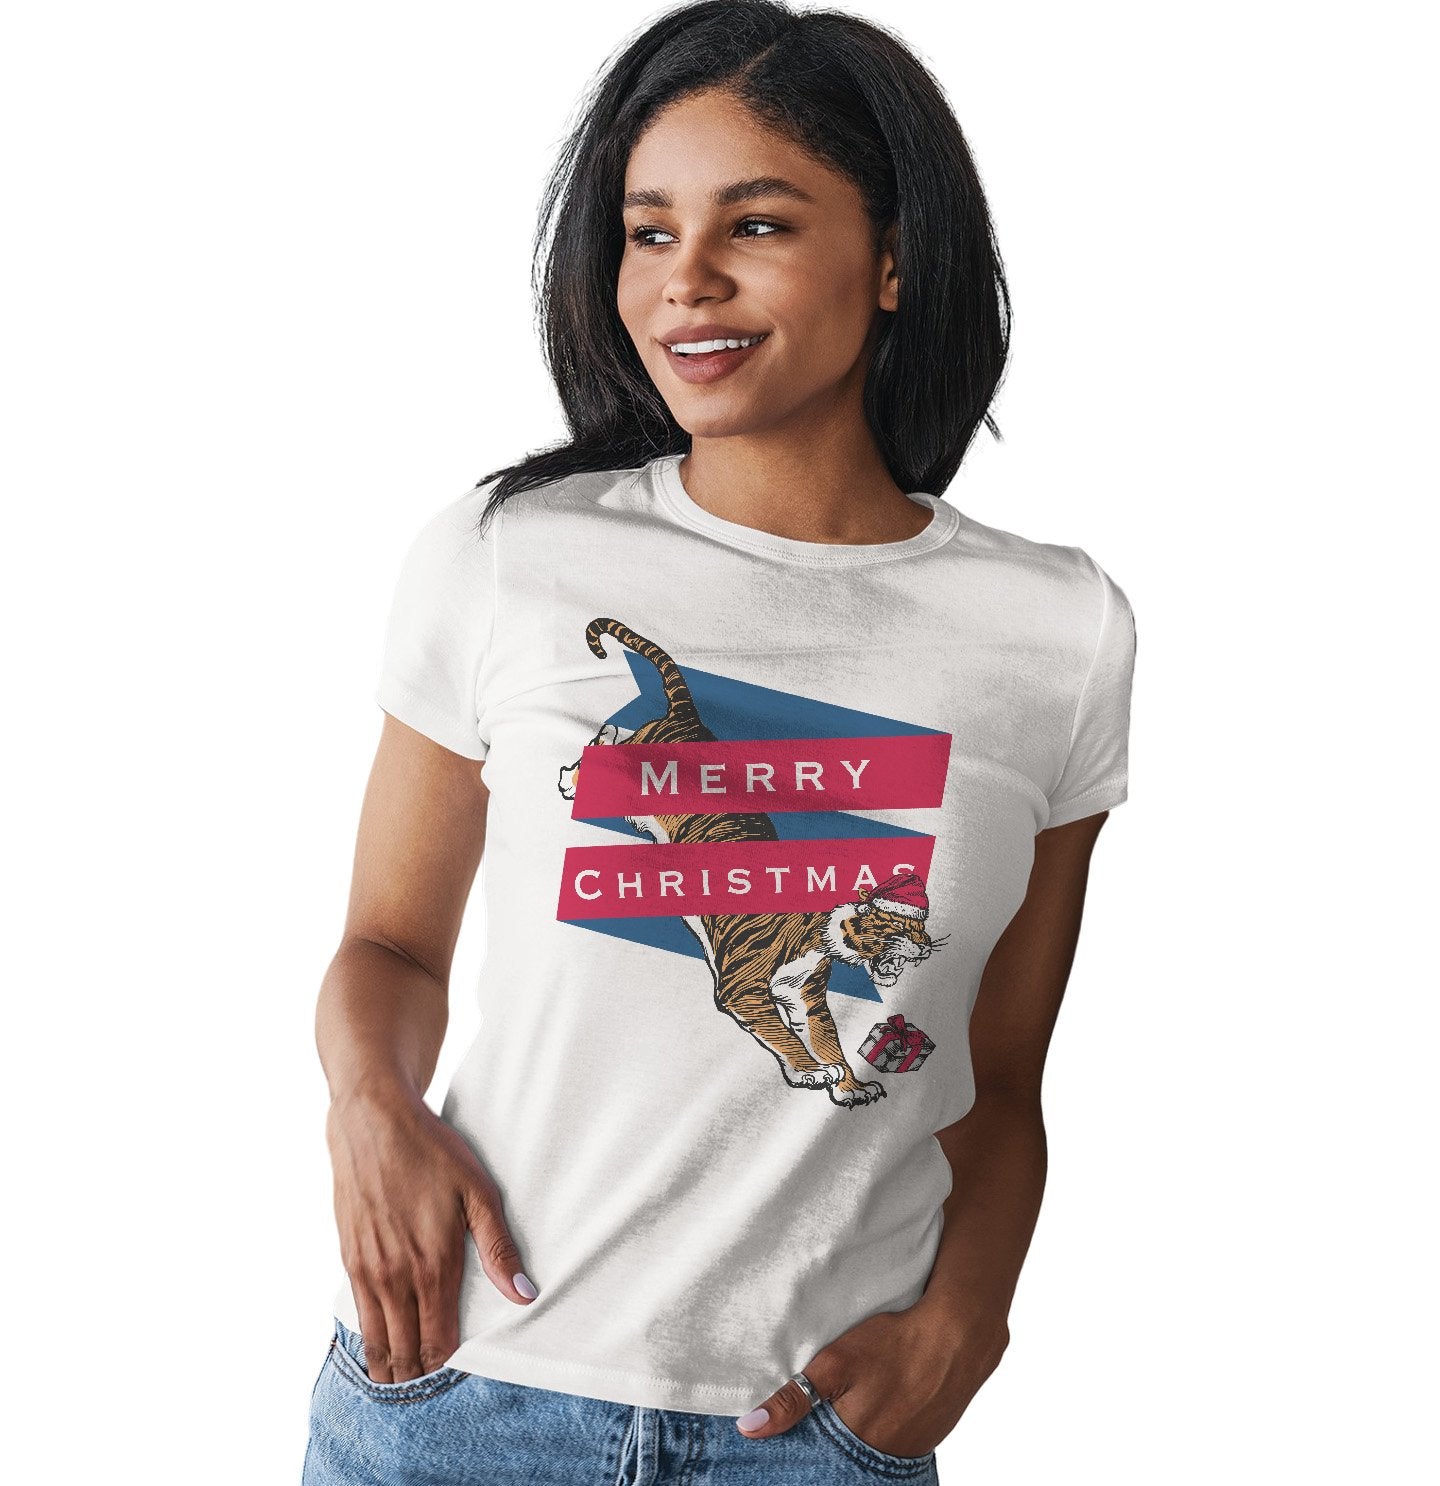 Merry Christmas Tiger - Women's Fitted T-Shirt